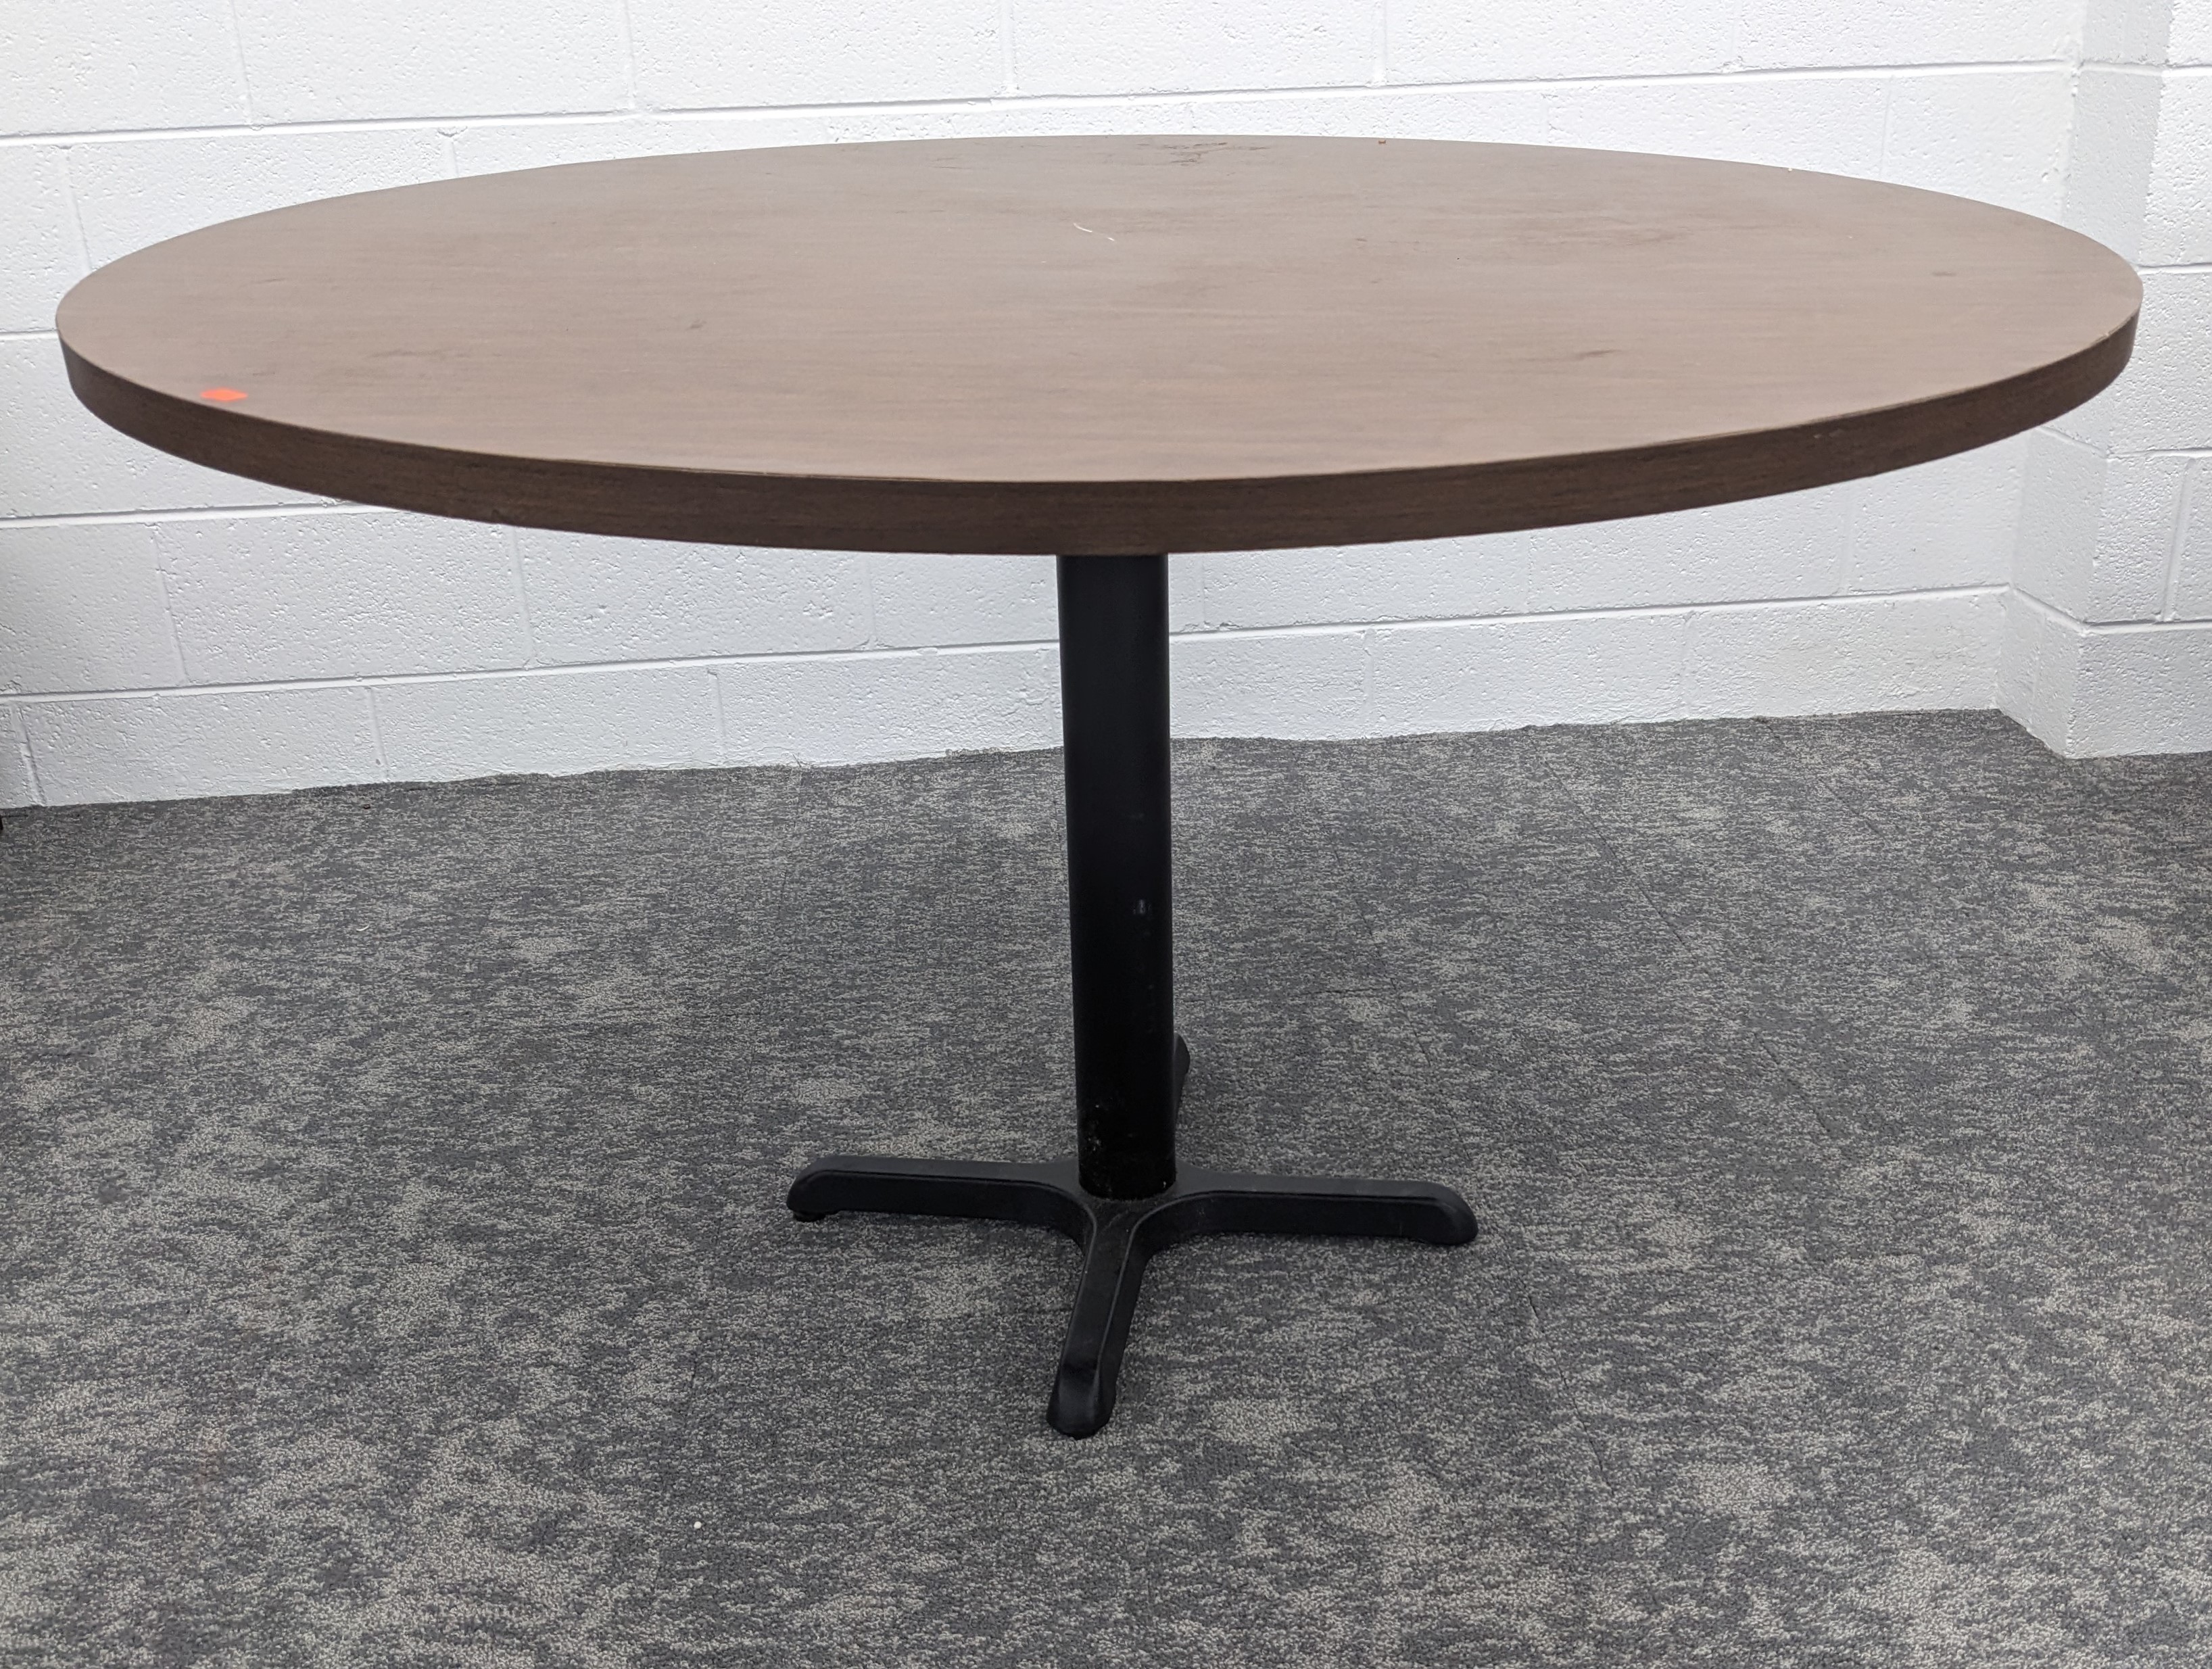 Used 48" Round Conference Table